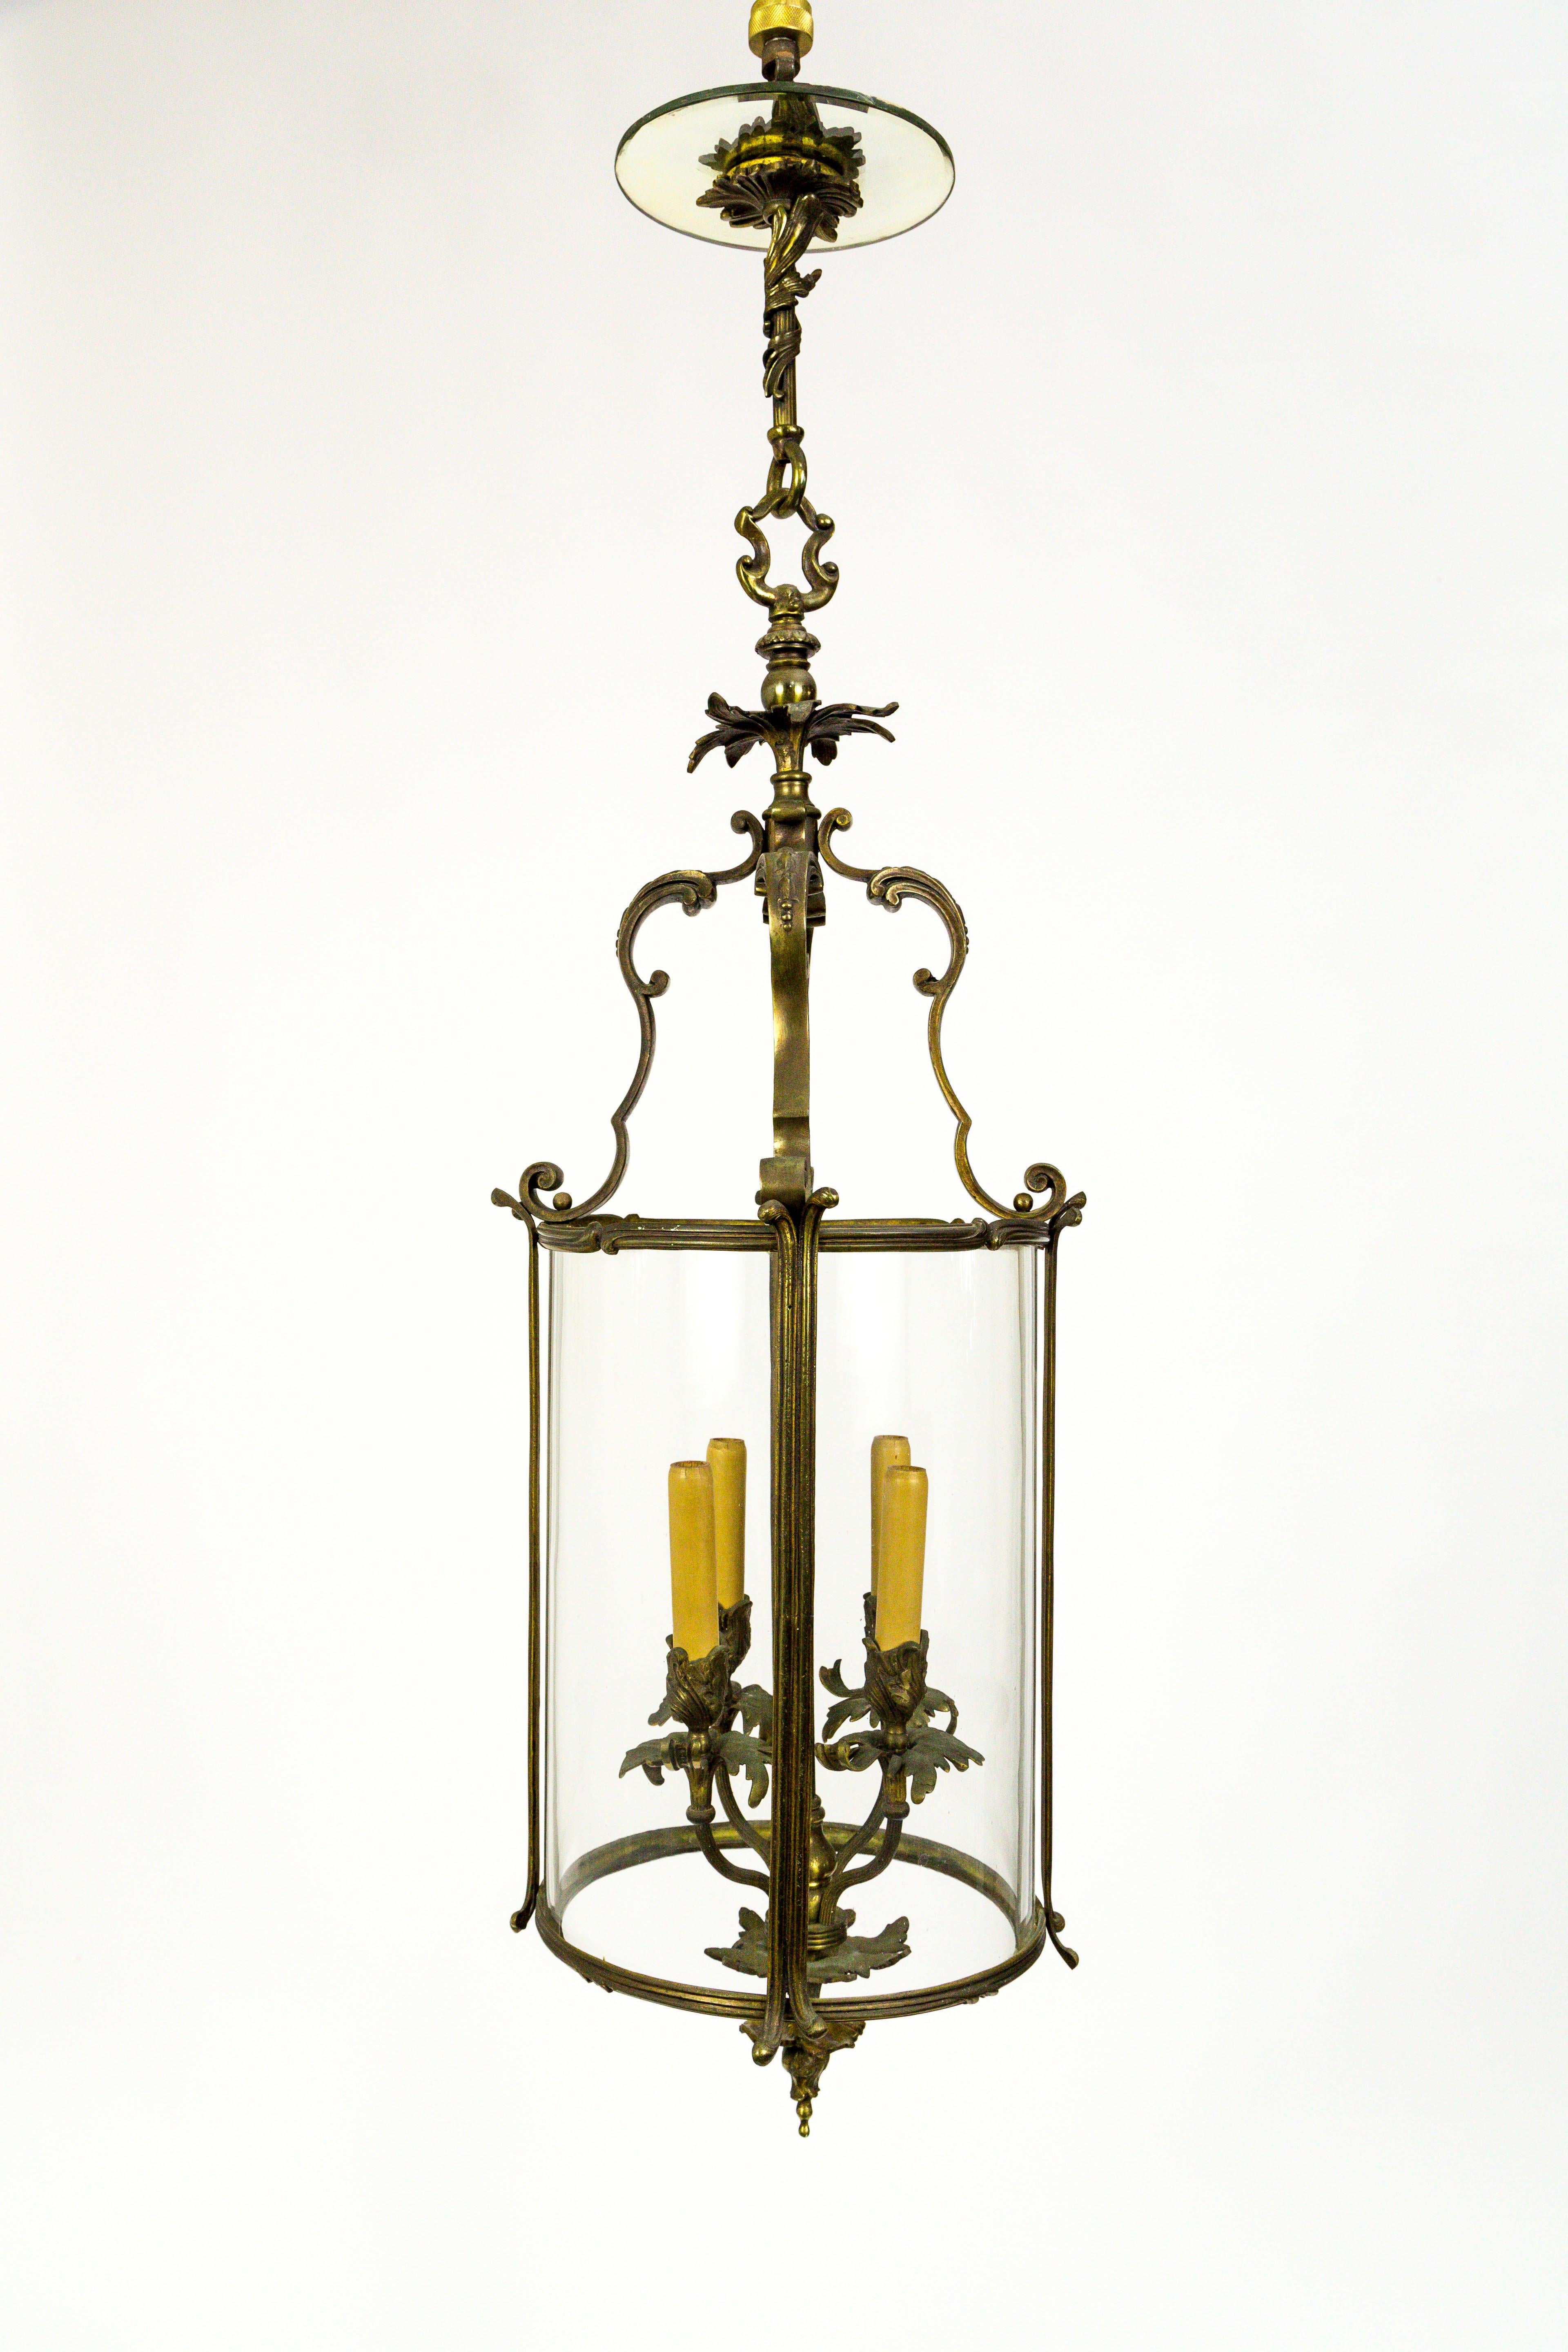 This French Regency style lantern is truly magnificent.
The details and shapes of the body, made of bronze that was formerly gilded, adorn cylindrical, handblown glass. The foliate decorations on the stem, finial, and four-light candelabra cluster,